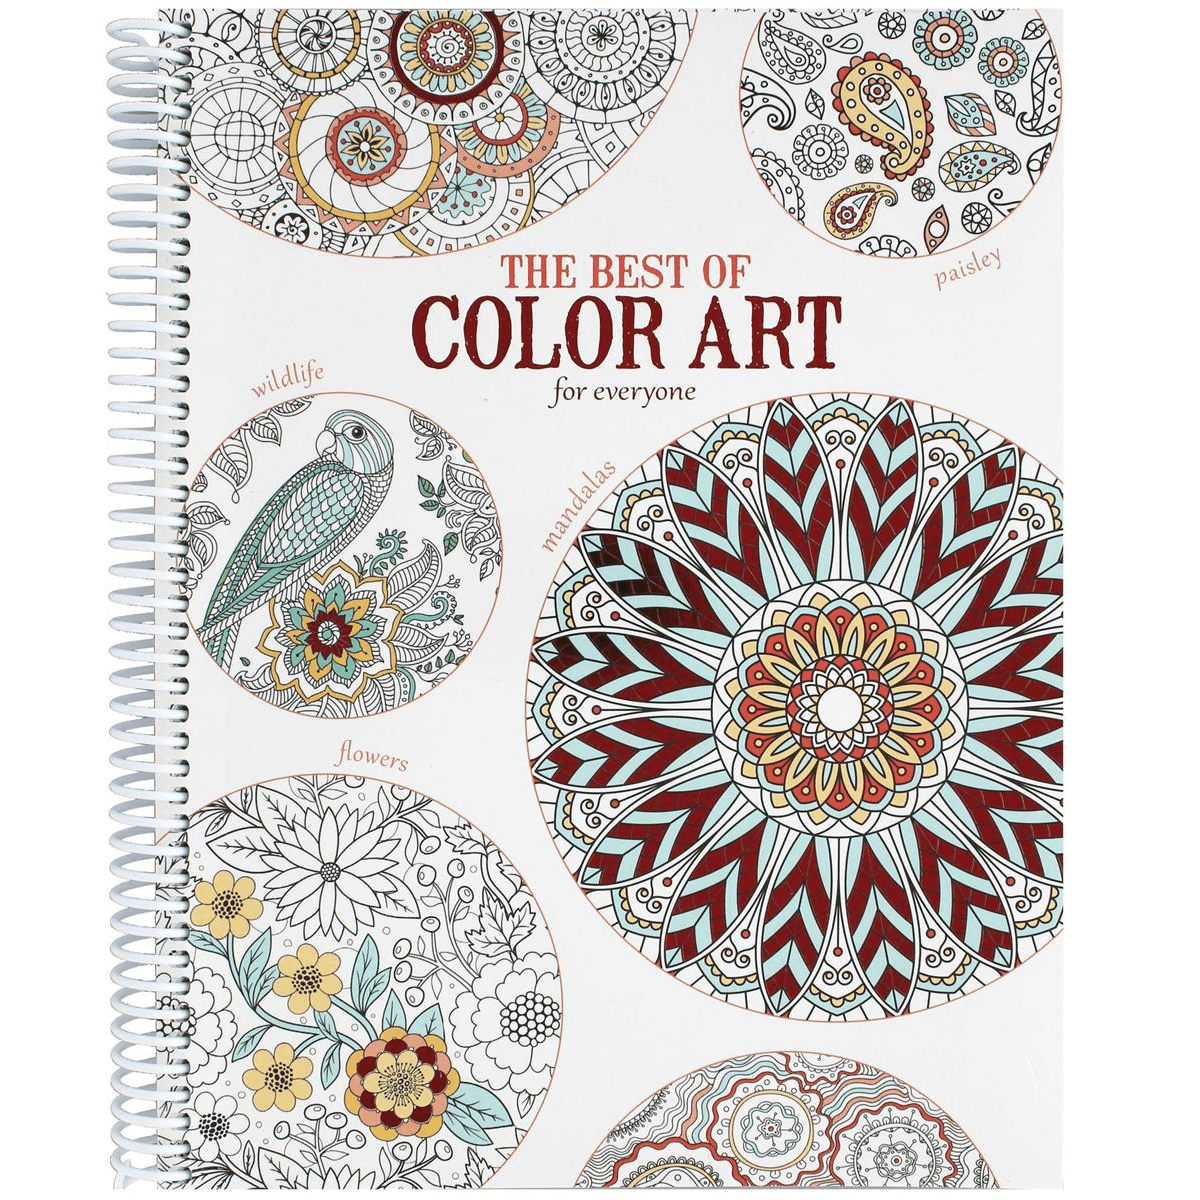 Best Colored Pencils For Adult Coloring Books In 2024